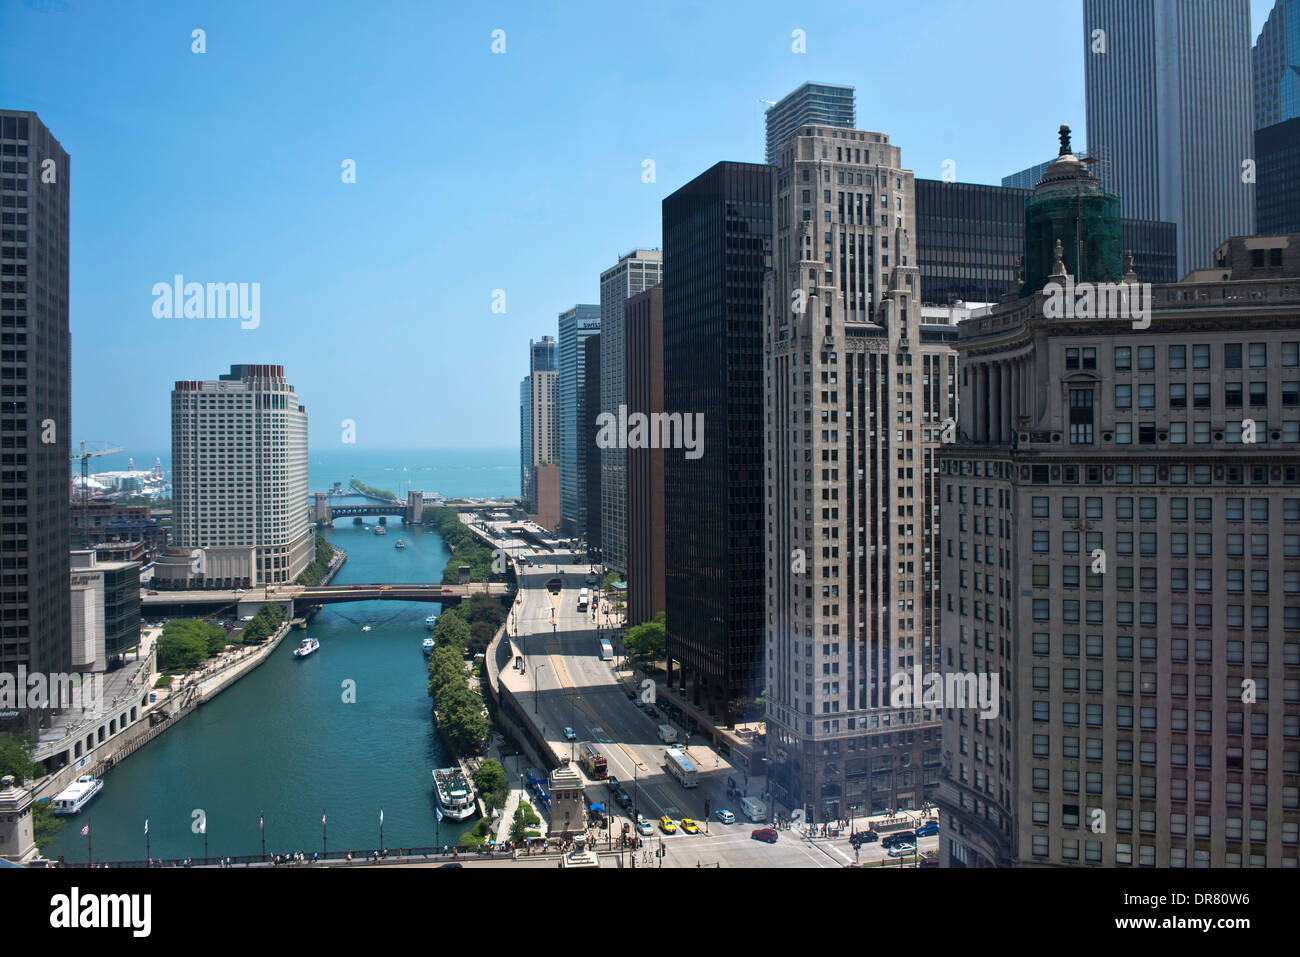 Chicago City Skyline 2013, Chicago, United States. Architect: various, 2013. Chicago River looking east. Stock Photo